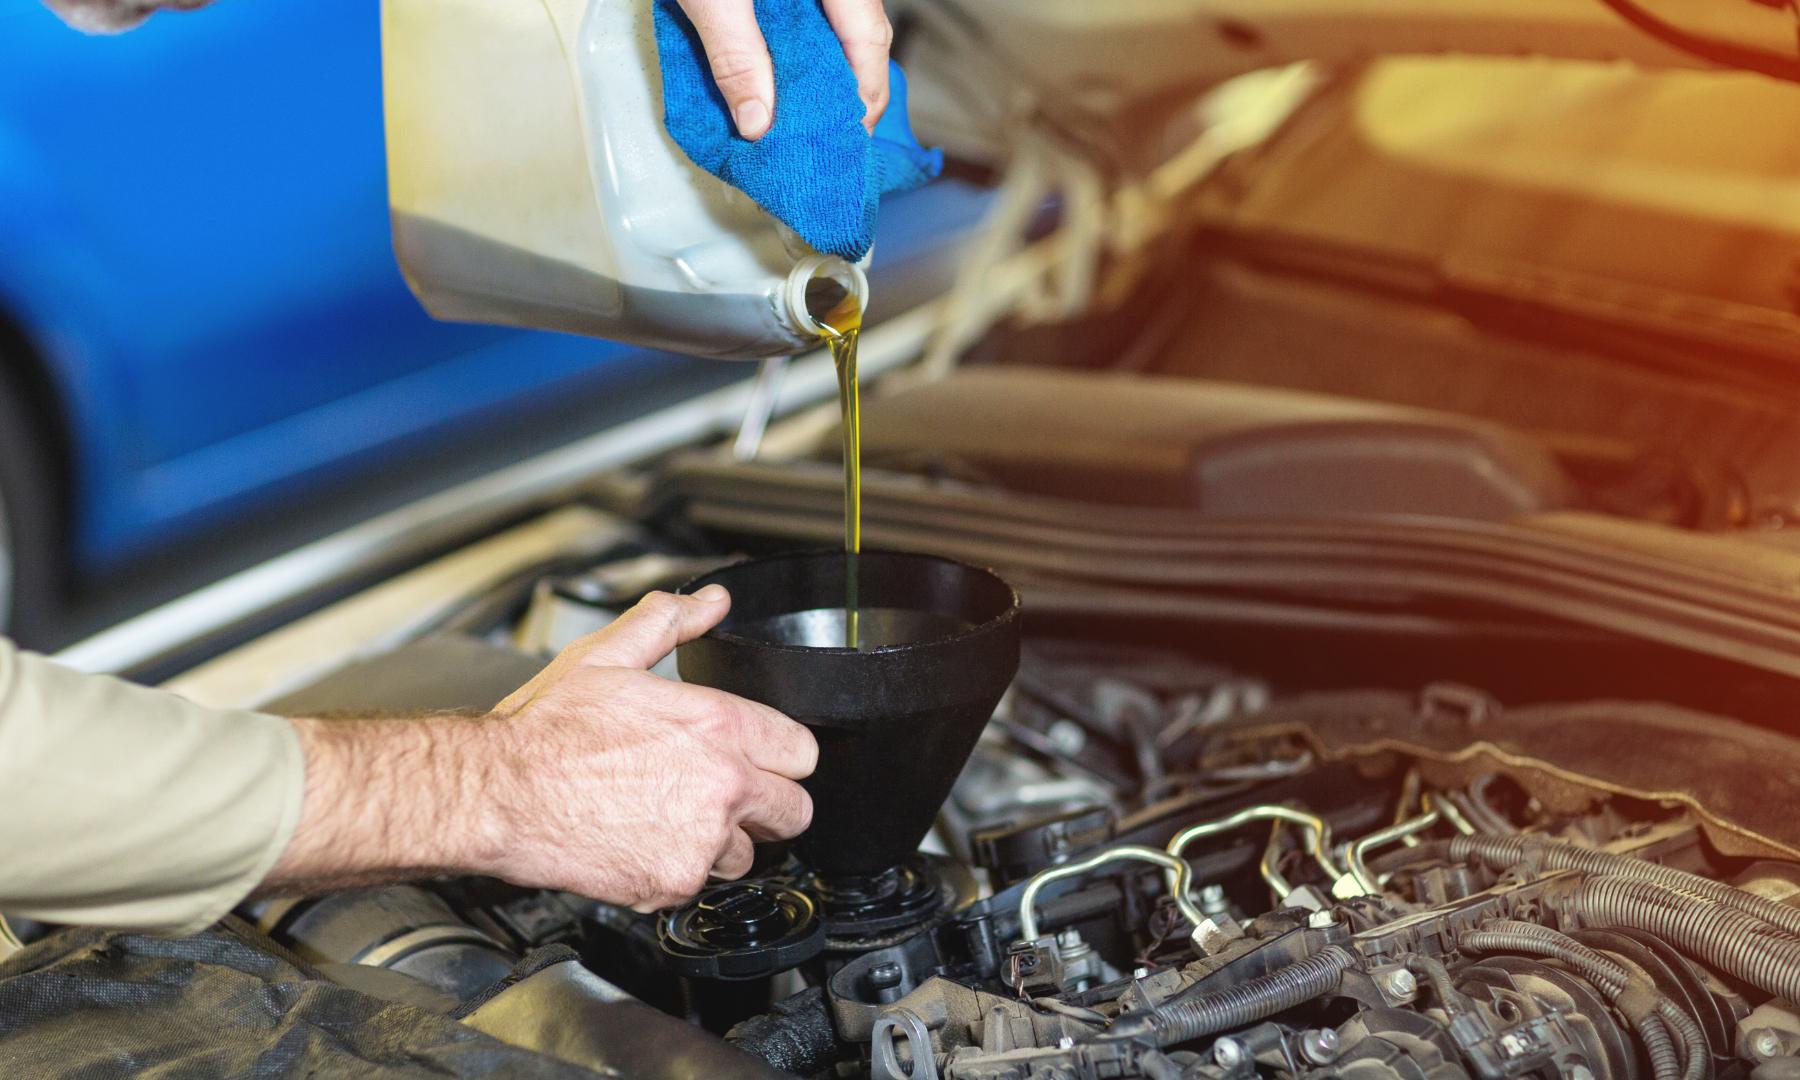 How to Change Vehicle Oil at Home During Pandemic